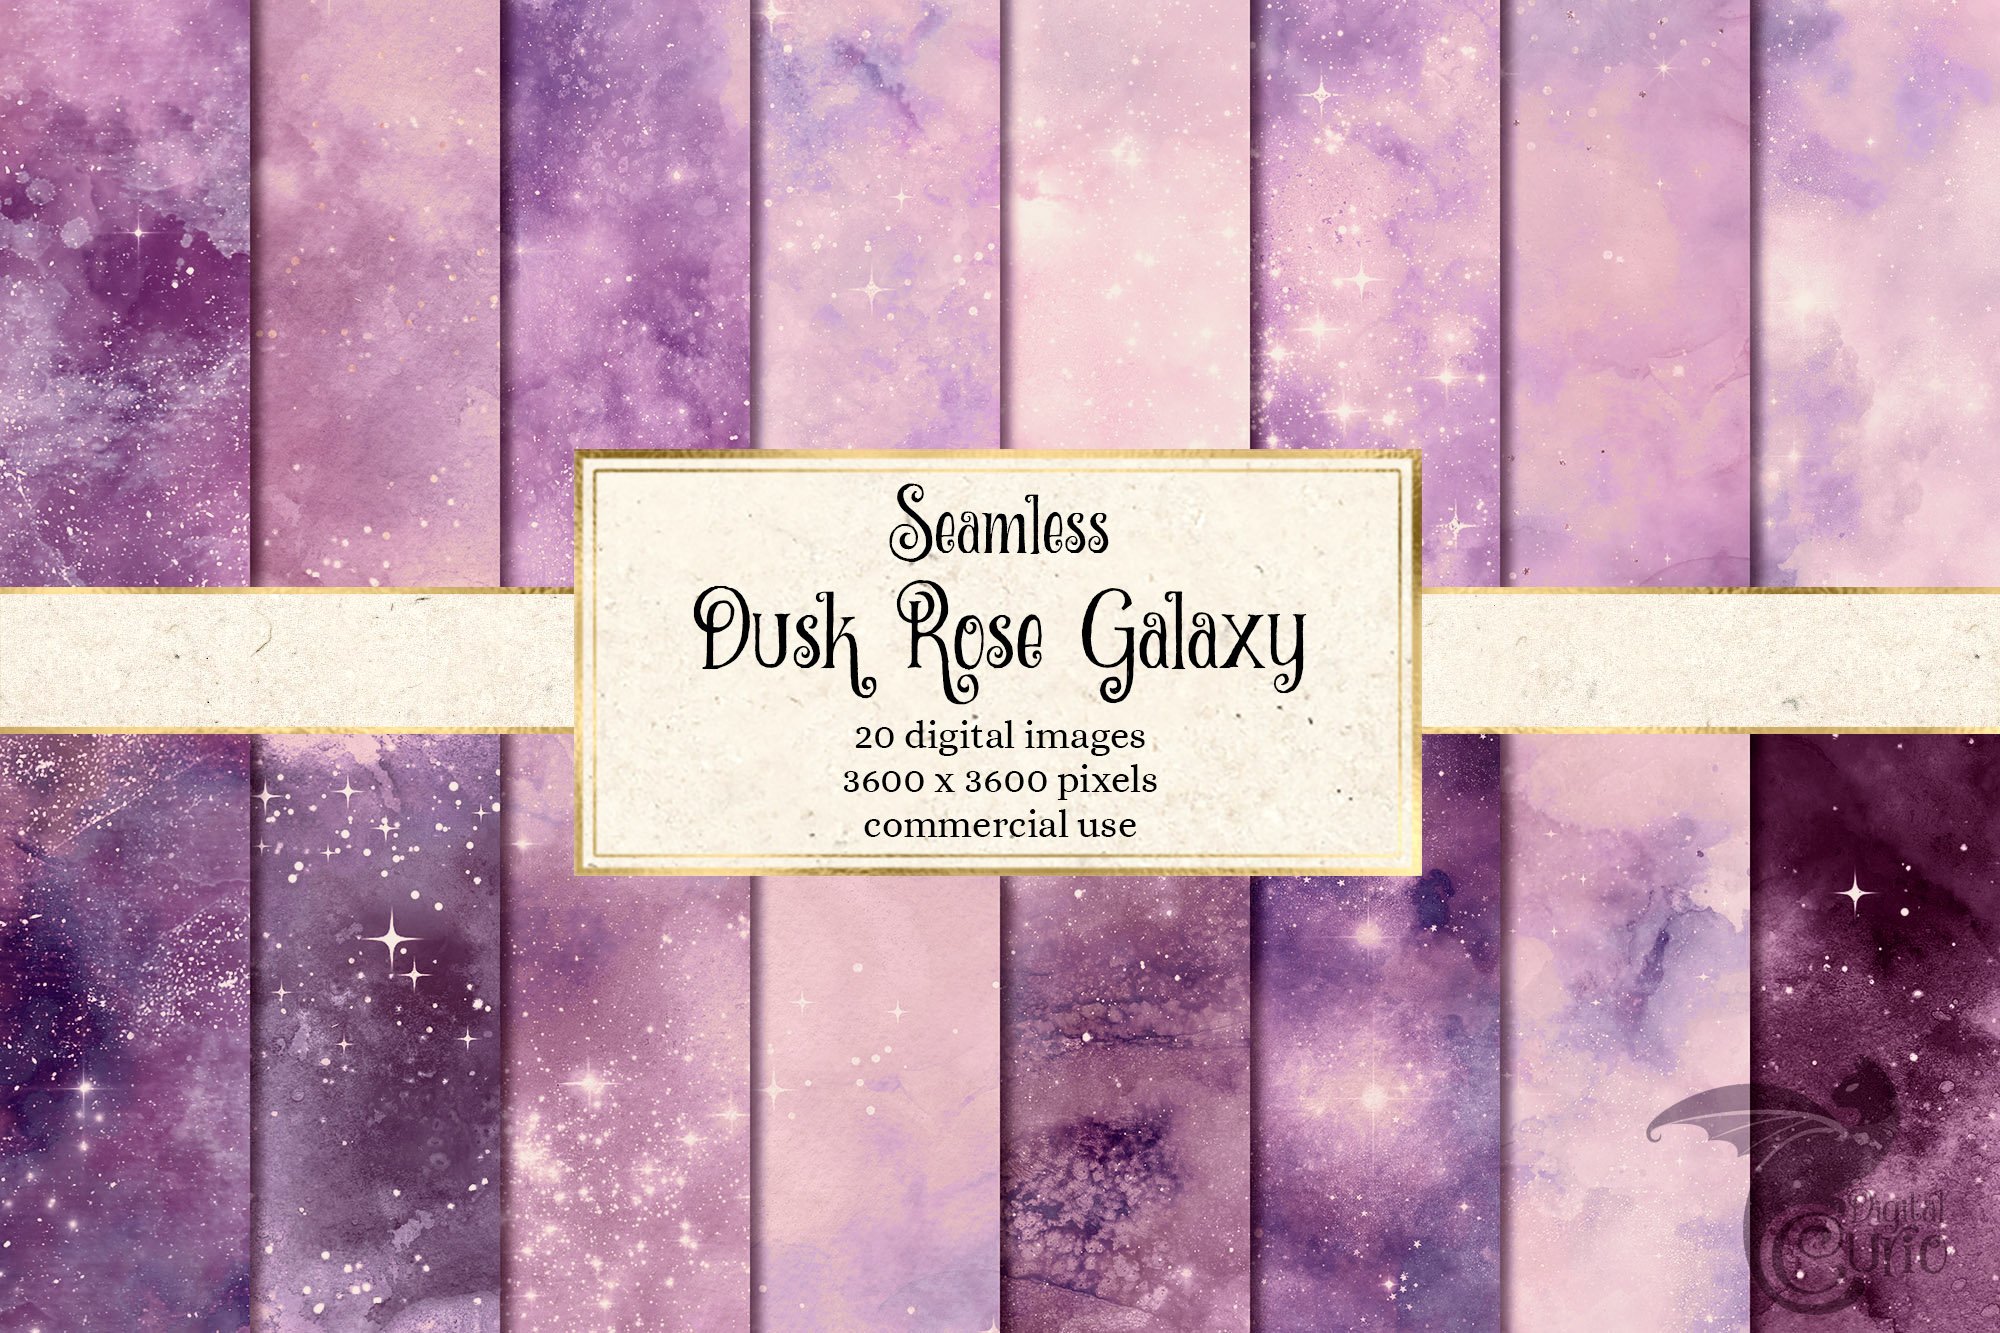 Dusk Rose Galaxy Textures cover image.